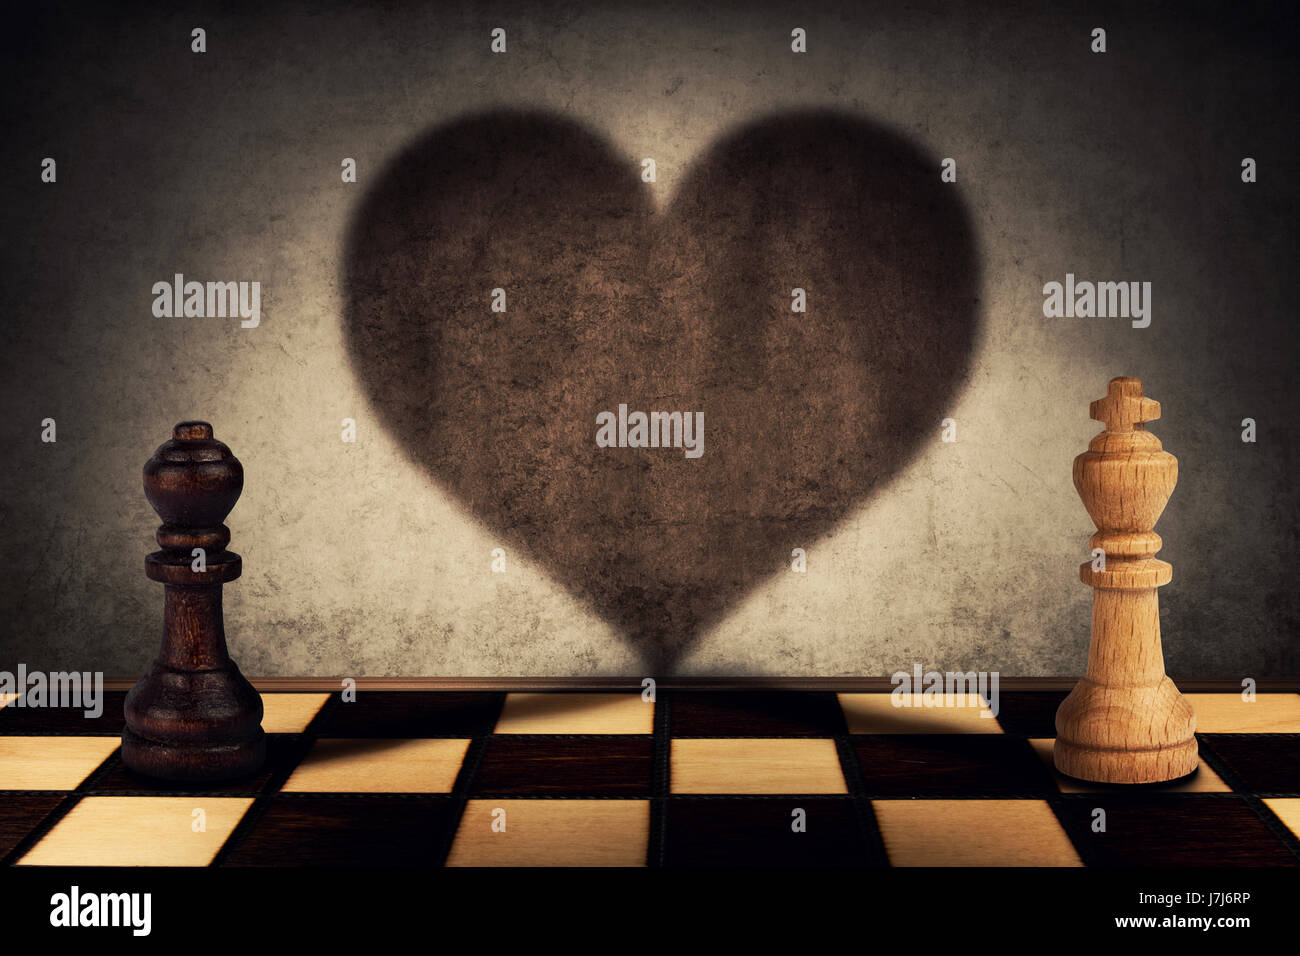 Black queen and white king chess pieces standing in front one another casting their shadows transform into a big heart on the wall. Love symbol Stock Photo